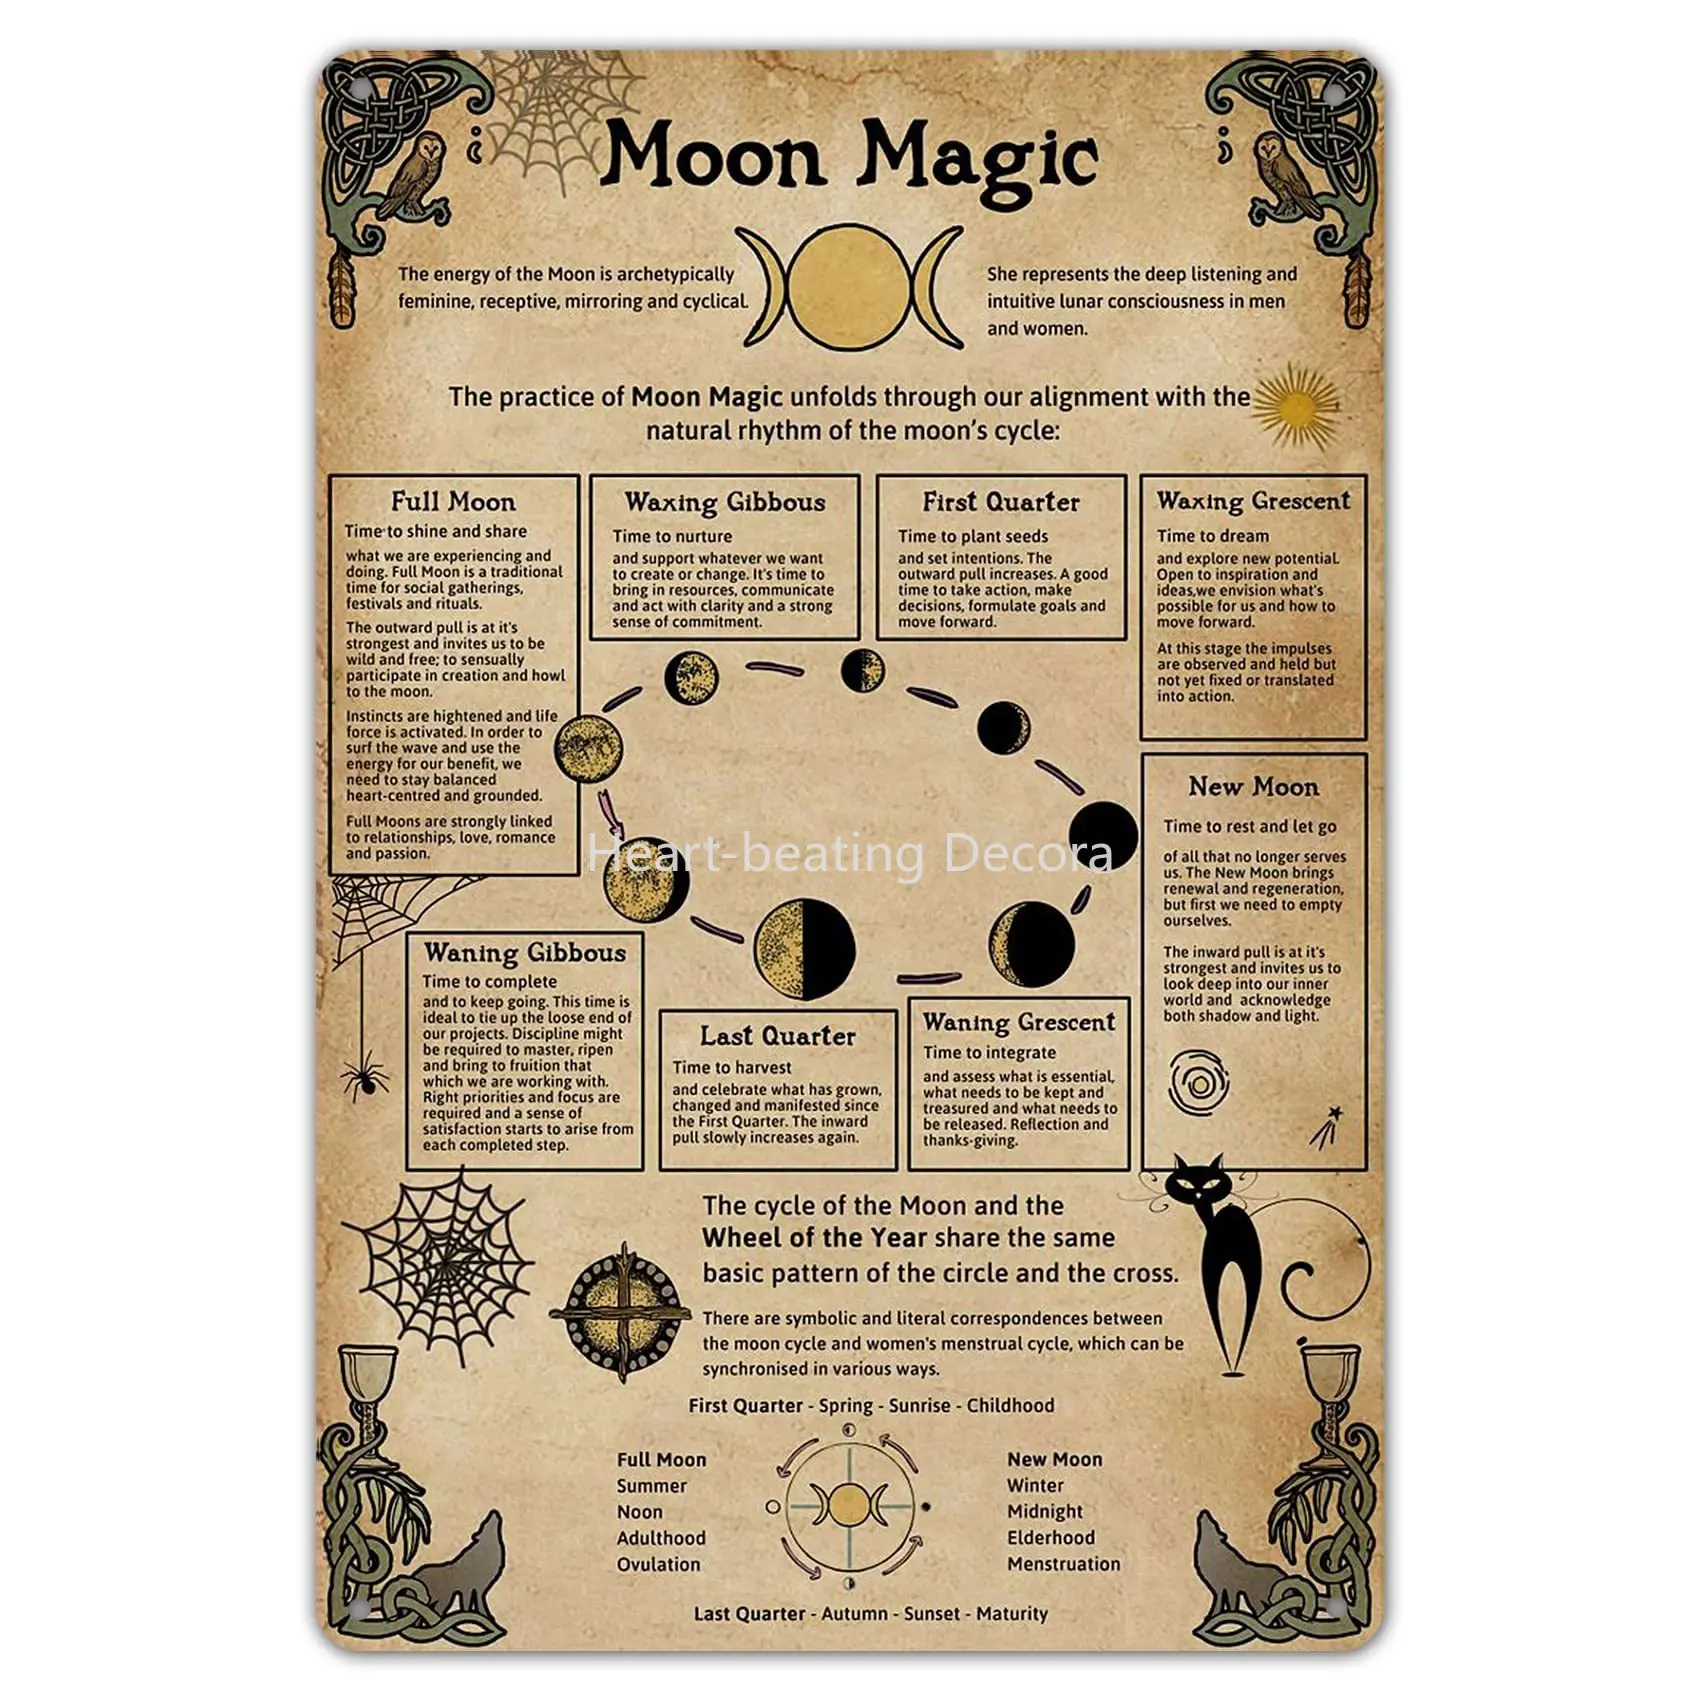 Moon Magic Knowledge Metal Tin Planning Infographic Poster Plaque for School Education Club Home Wall Decor Wall Decor Metal africa tree metal wall art tree of life metal wall decor 3x large metal tree wall decor artwork decoration for home decor